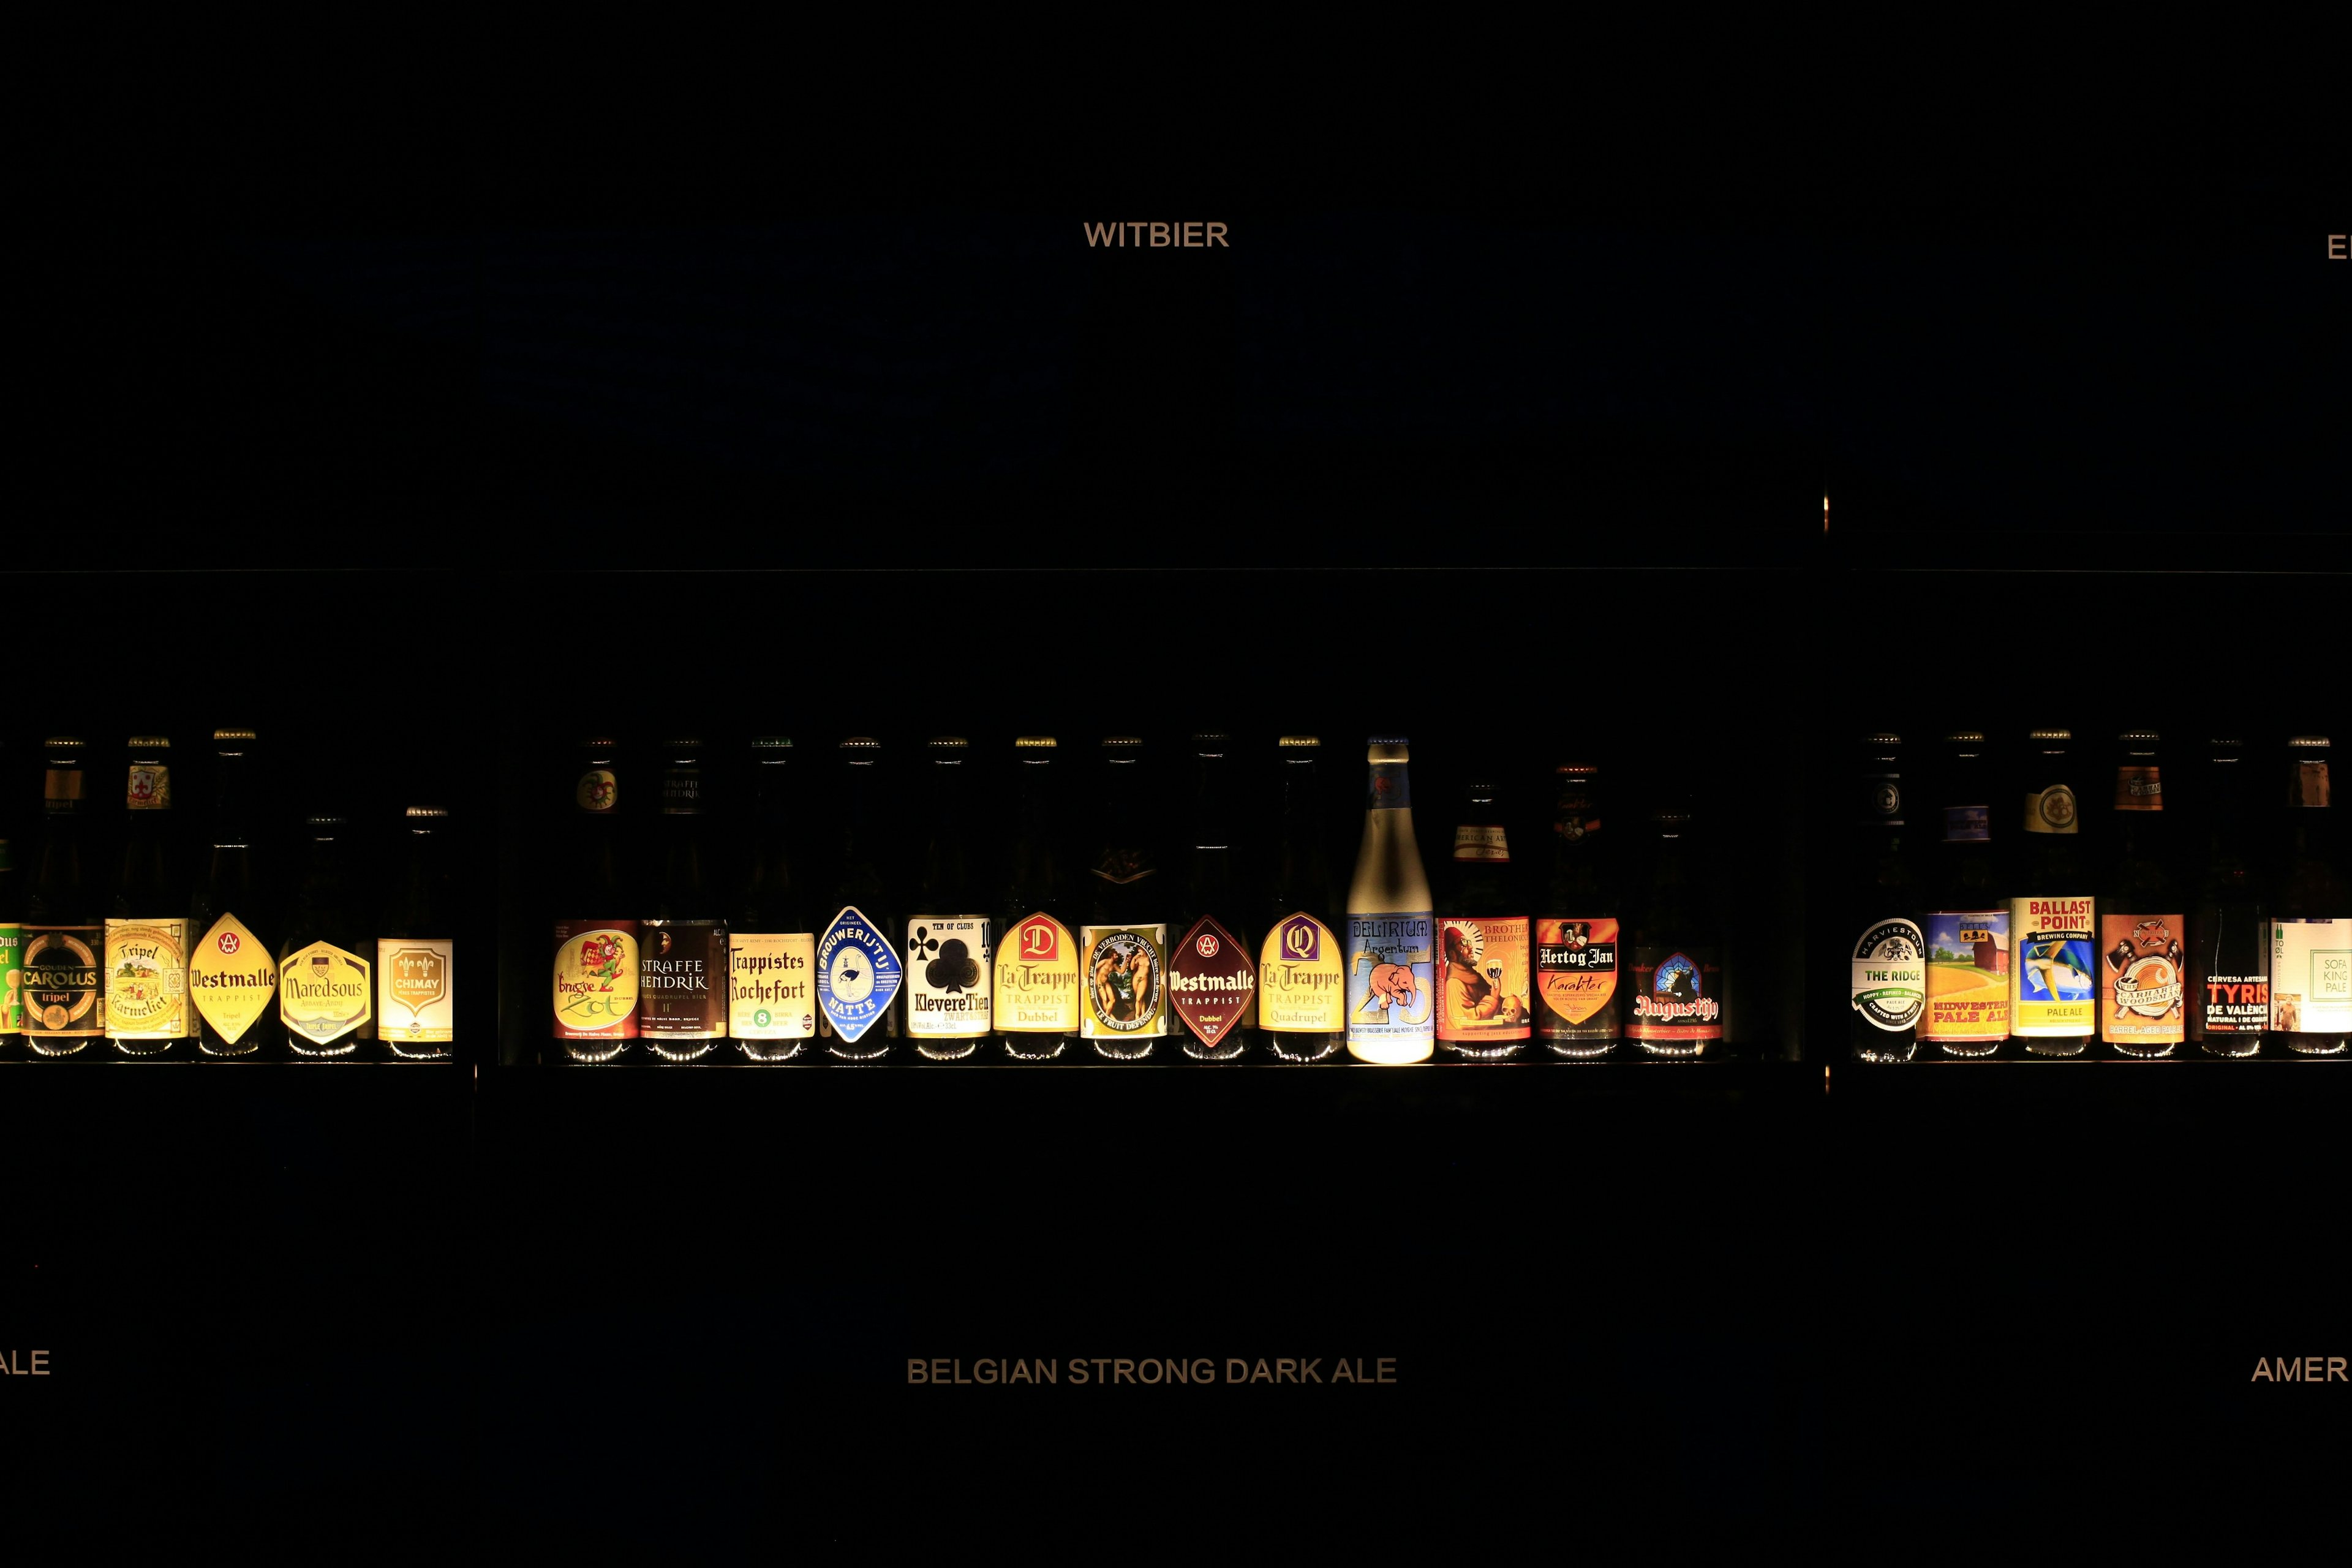 C2H60's interior design makes its imported beers, organized by style, the center of attention. (Courtesy Photo)